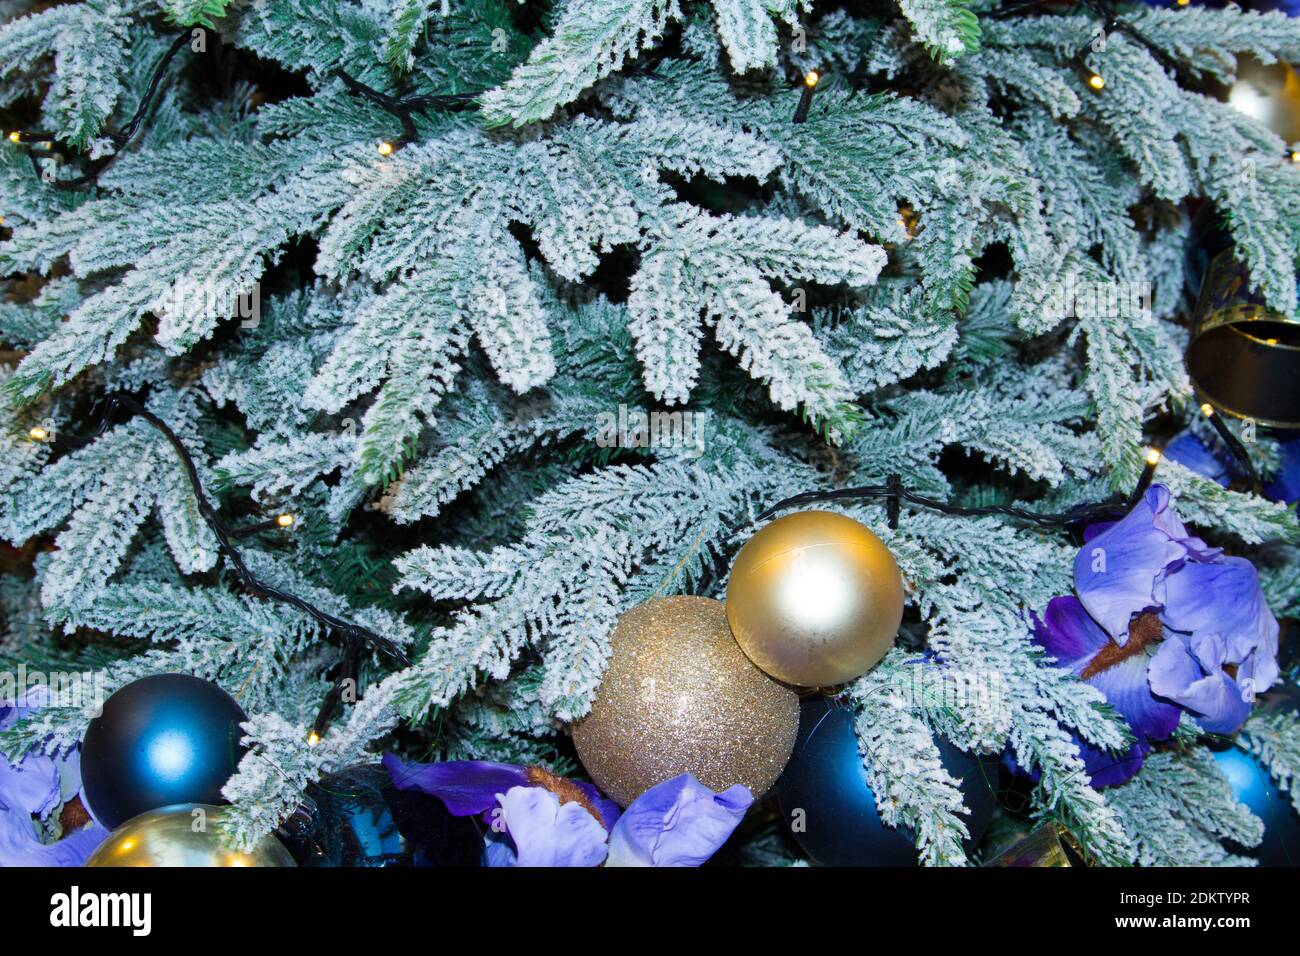 Snow-covered artificial fir tree with Christmas decorations in the form of purple flowers and balloons. Stock Photo